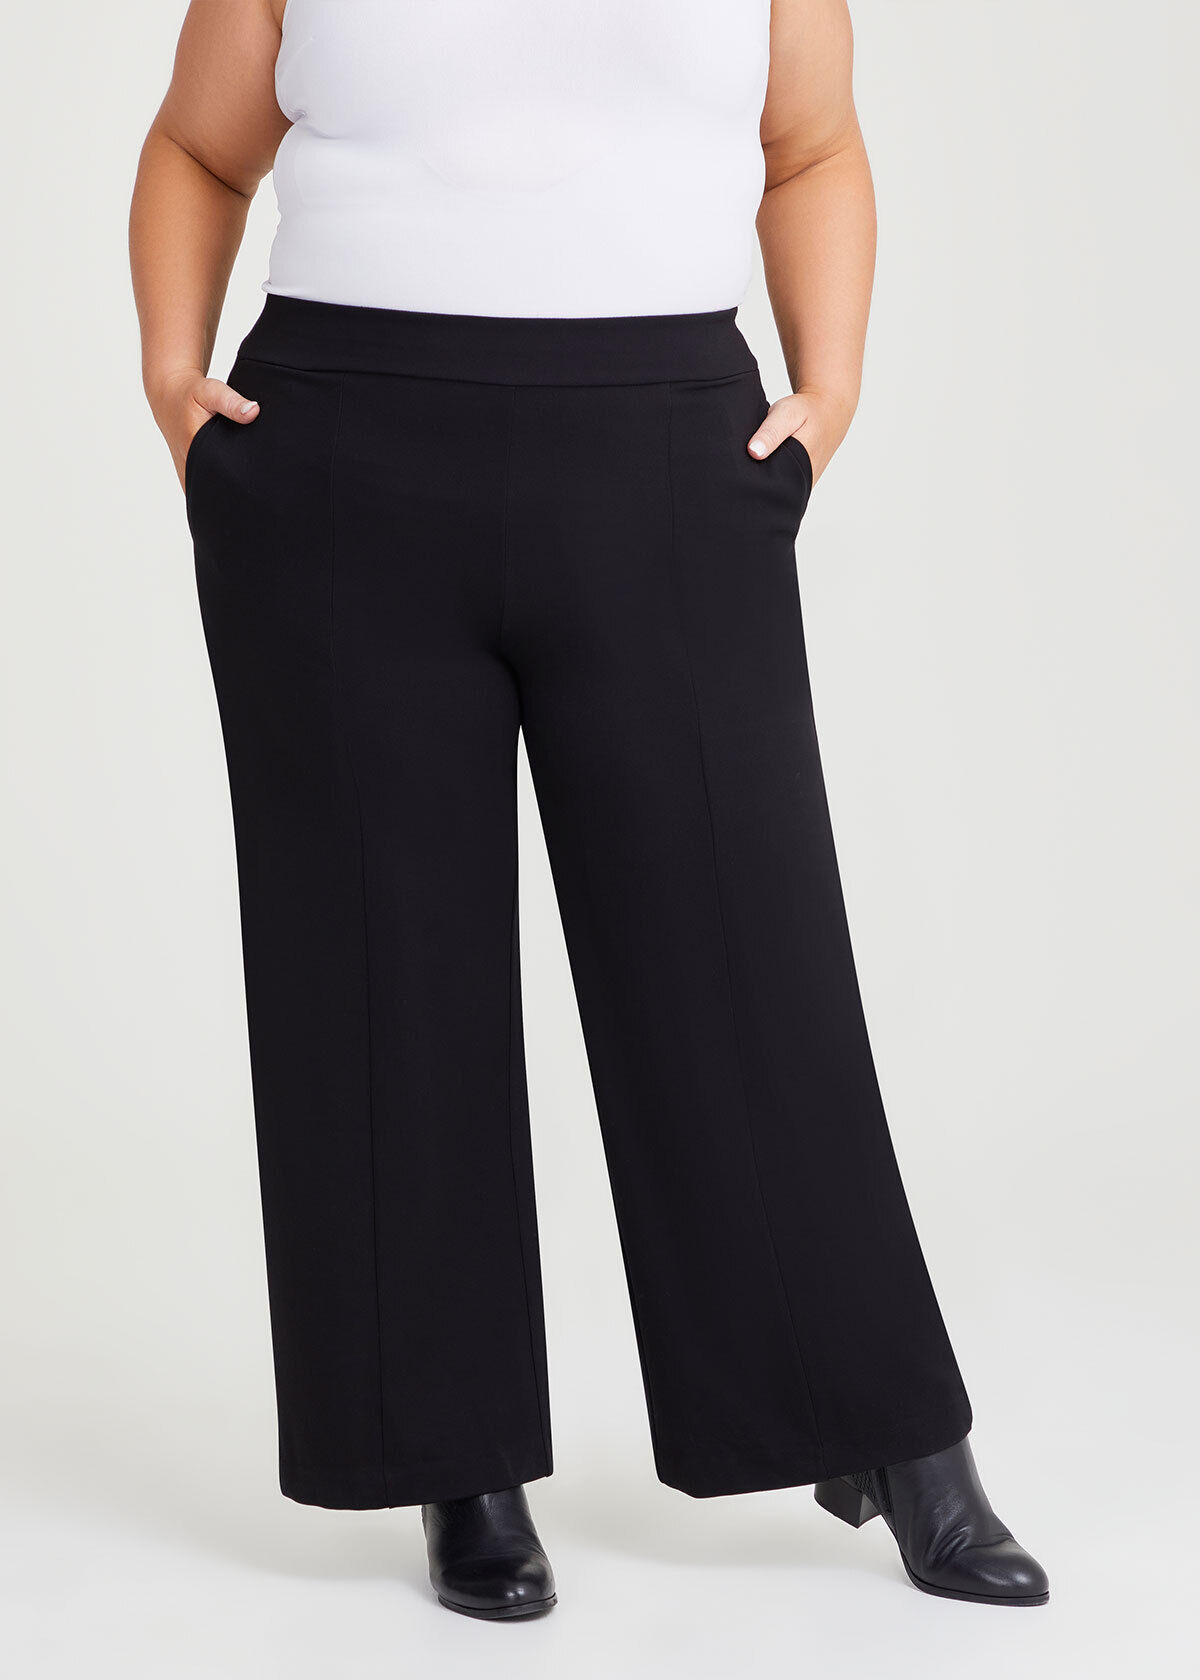 New Arrivals In Plus Size Pants, Skirts & Shorts | Taking Shape USA